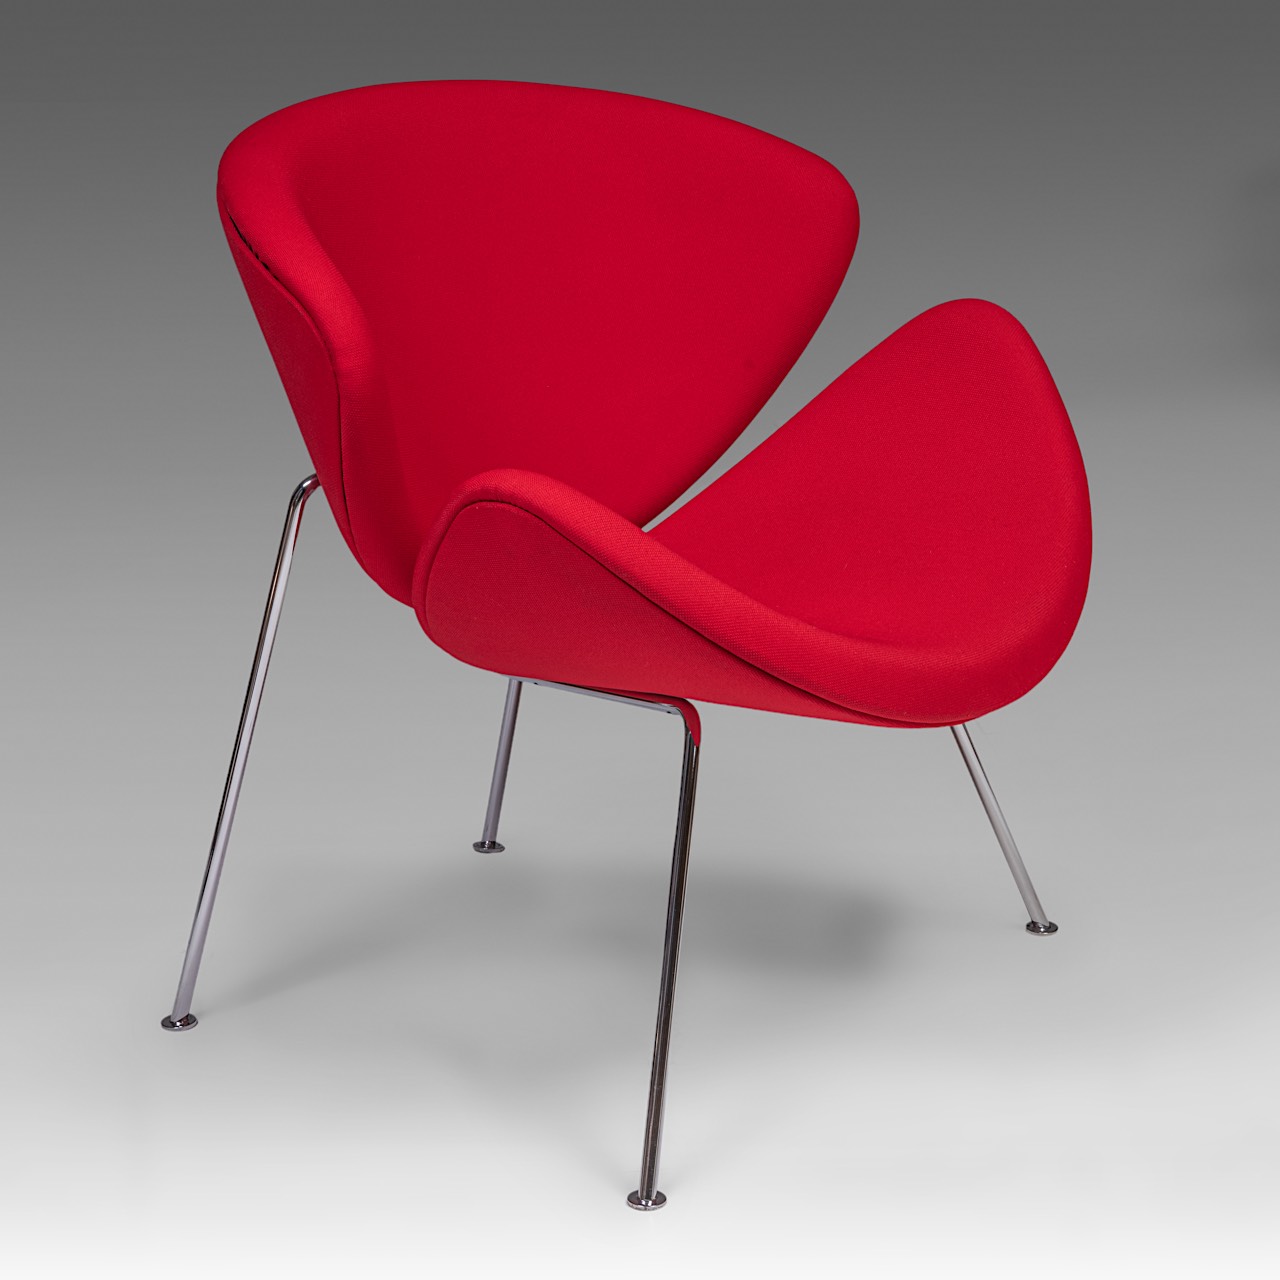 An Orange Slice chair by Pierre Pauline for Artifort, H 85 - W 82 cm - Image 2 of 9